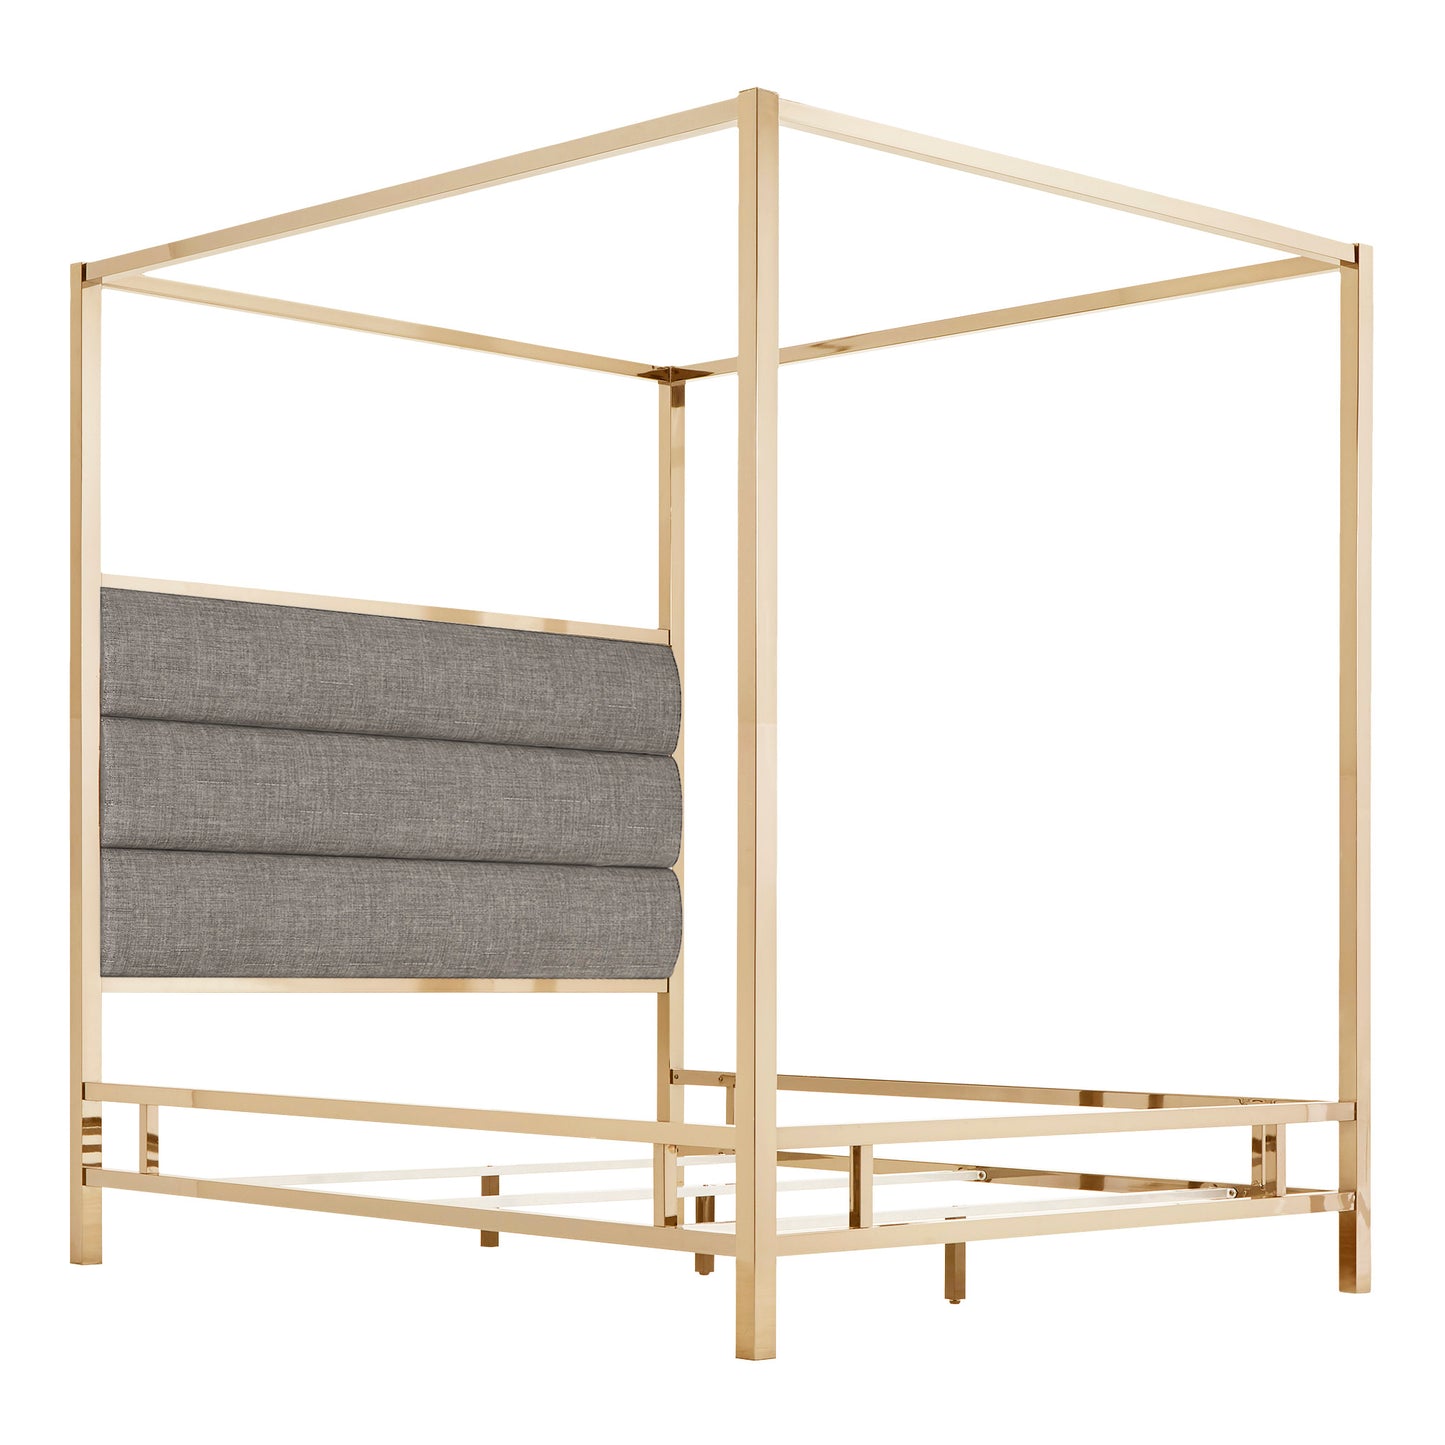 Metal Canopy Bed with Upholstered Headboard - Grey Linen, Champagne Gold Finish, Queen Size